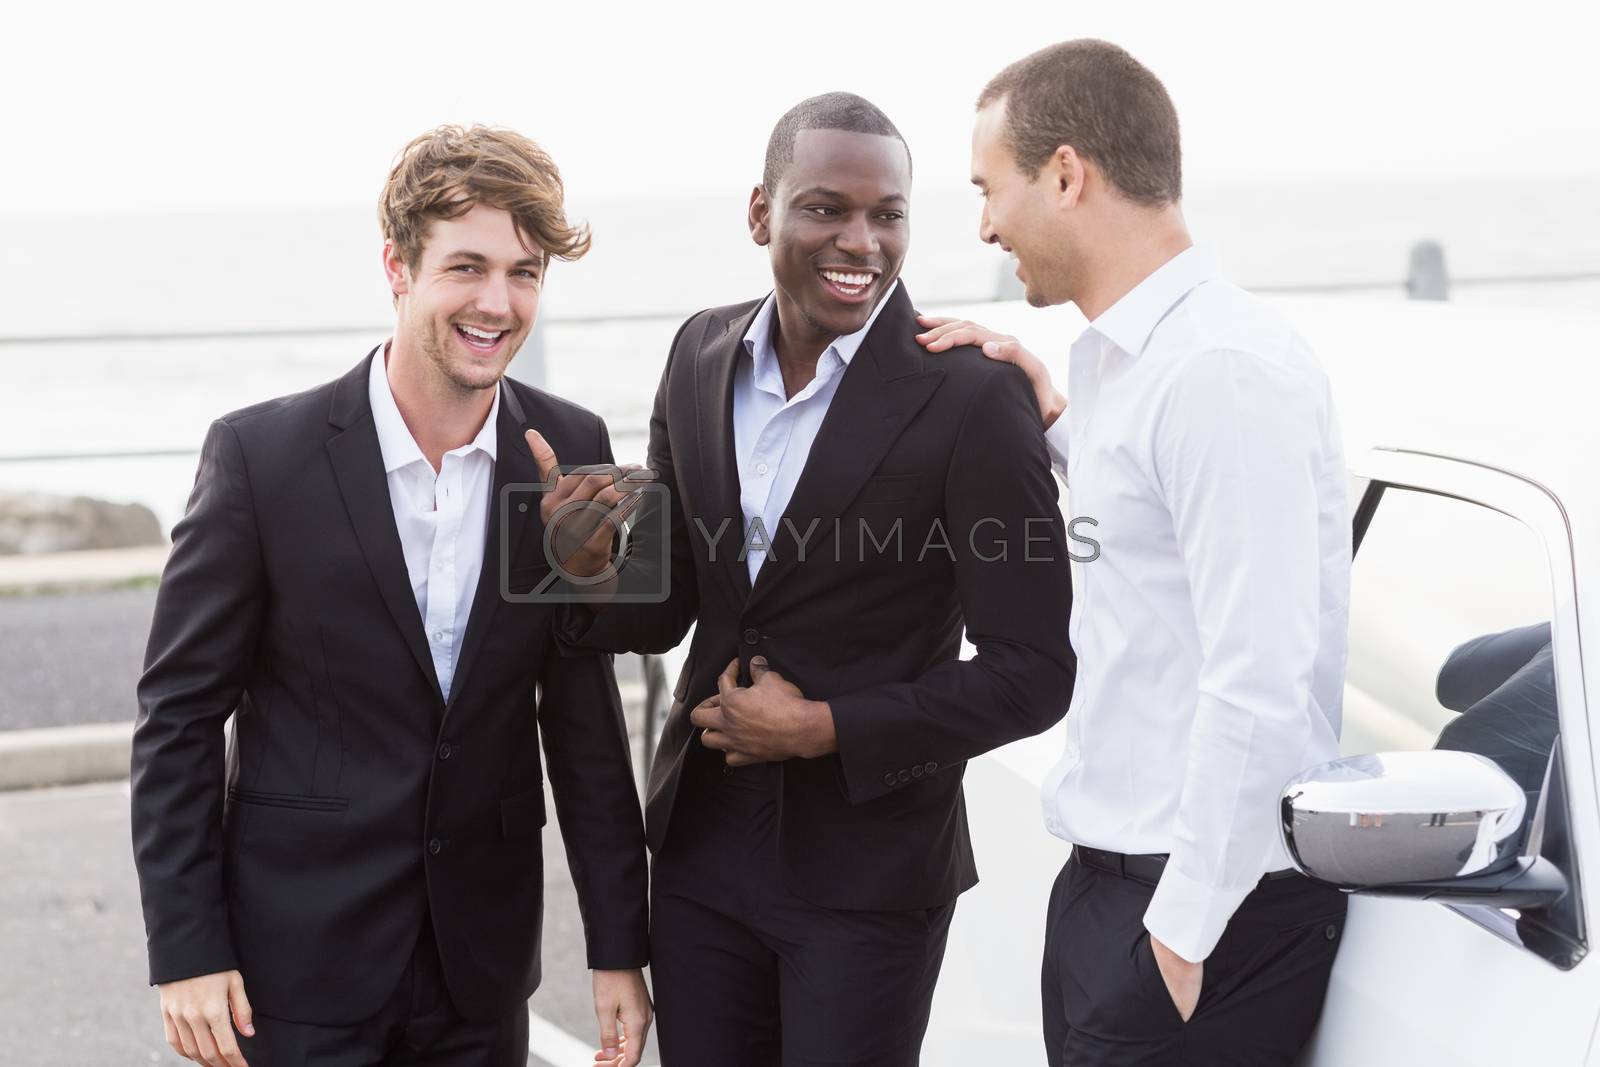 Royalty free image of Well dressed people posing next to a limousine by Wavebreakmedia